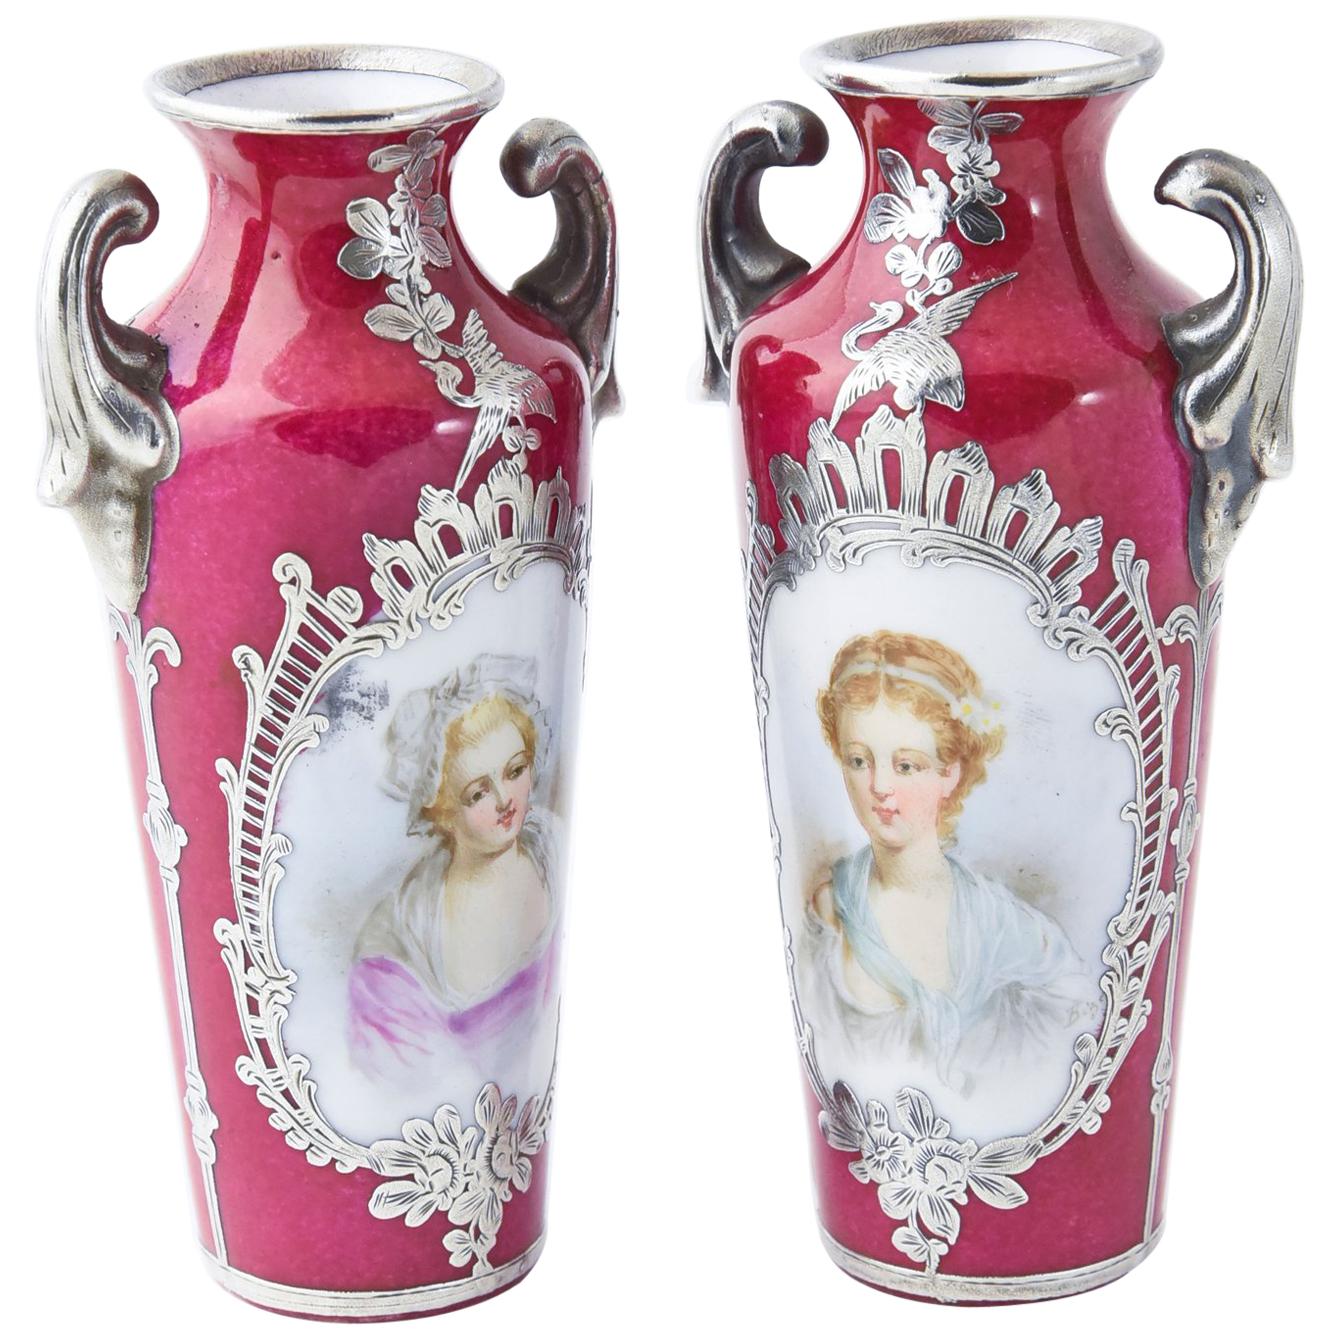 Pair of Pink Miniature Antique Portrait Vases with Silver Overlay Decoration For Sale